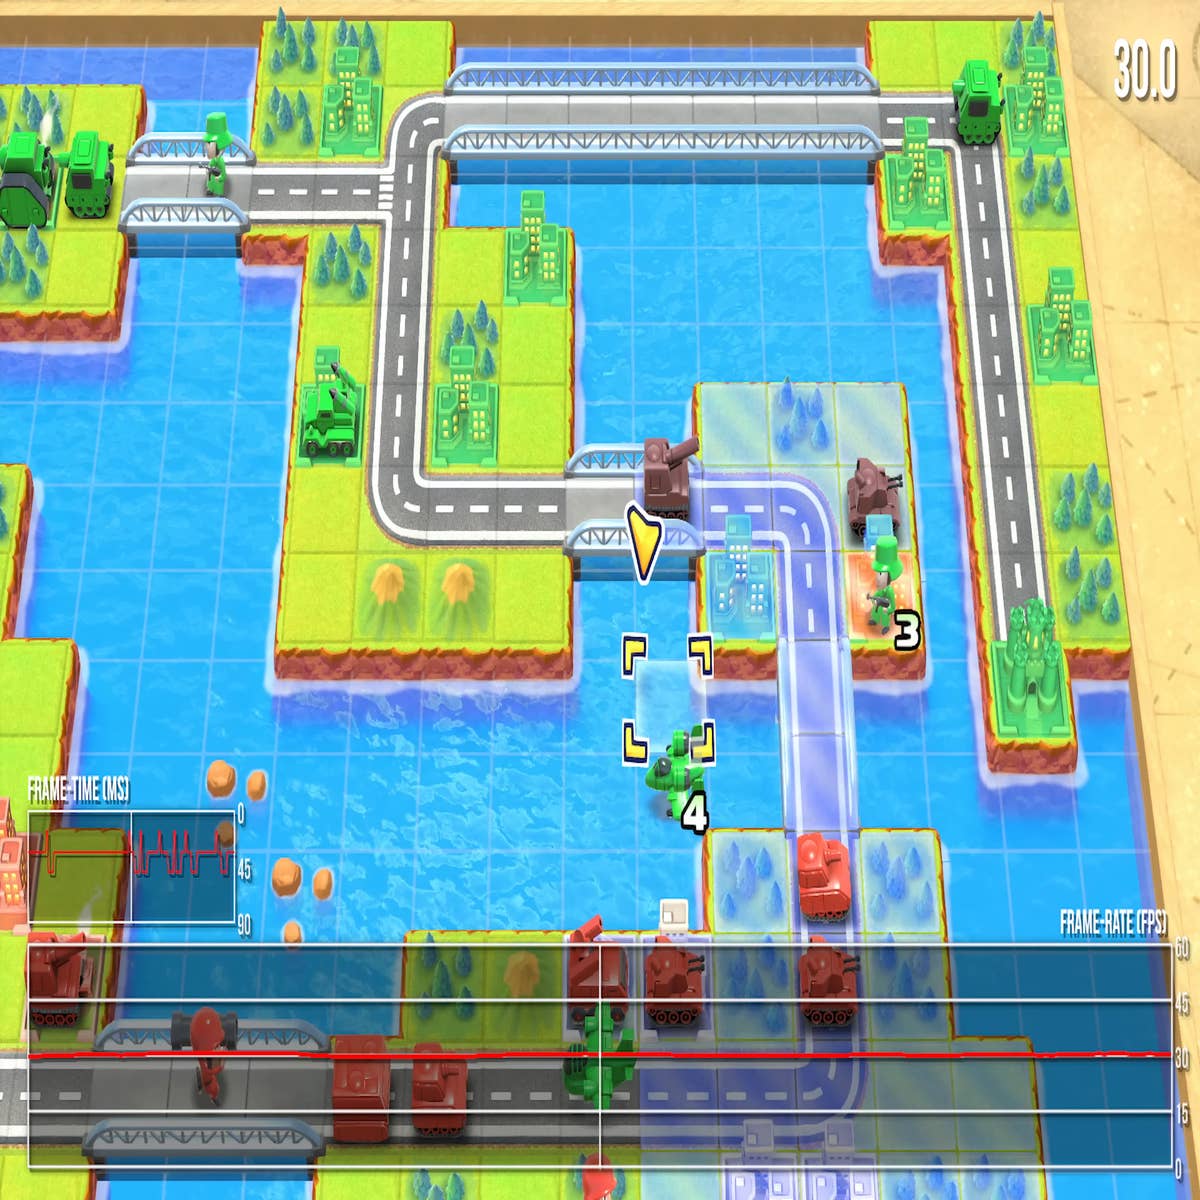 Advance Wars 1+2: Re-Boot Camp keeps much of what made the